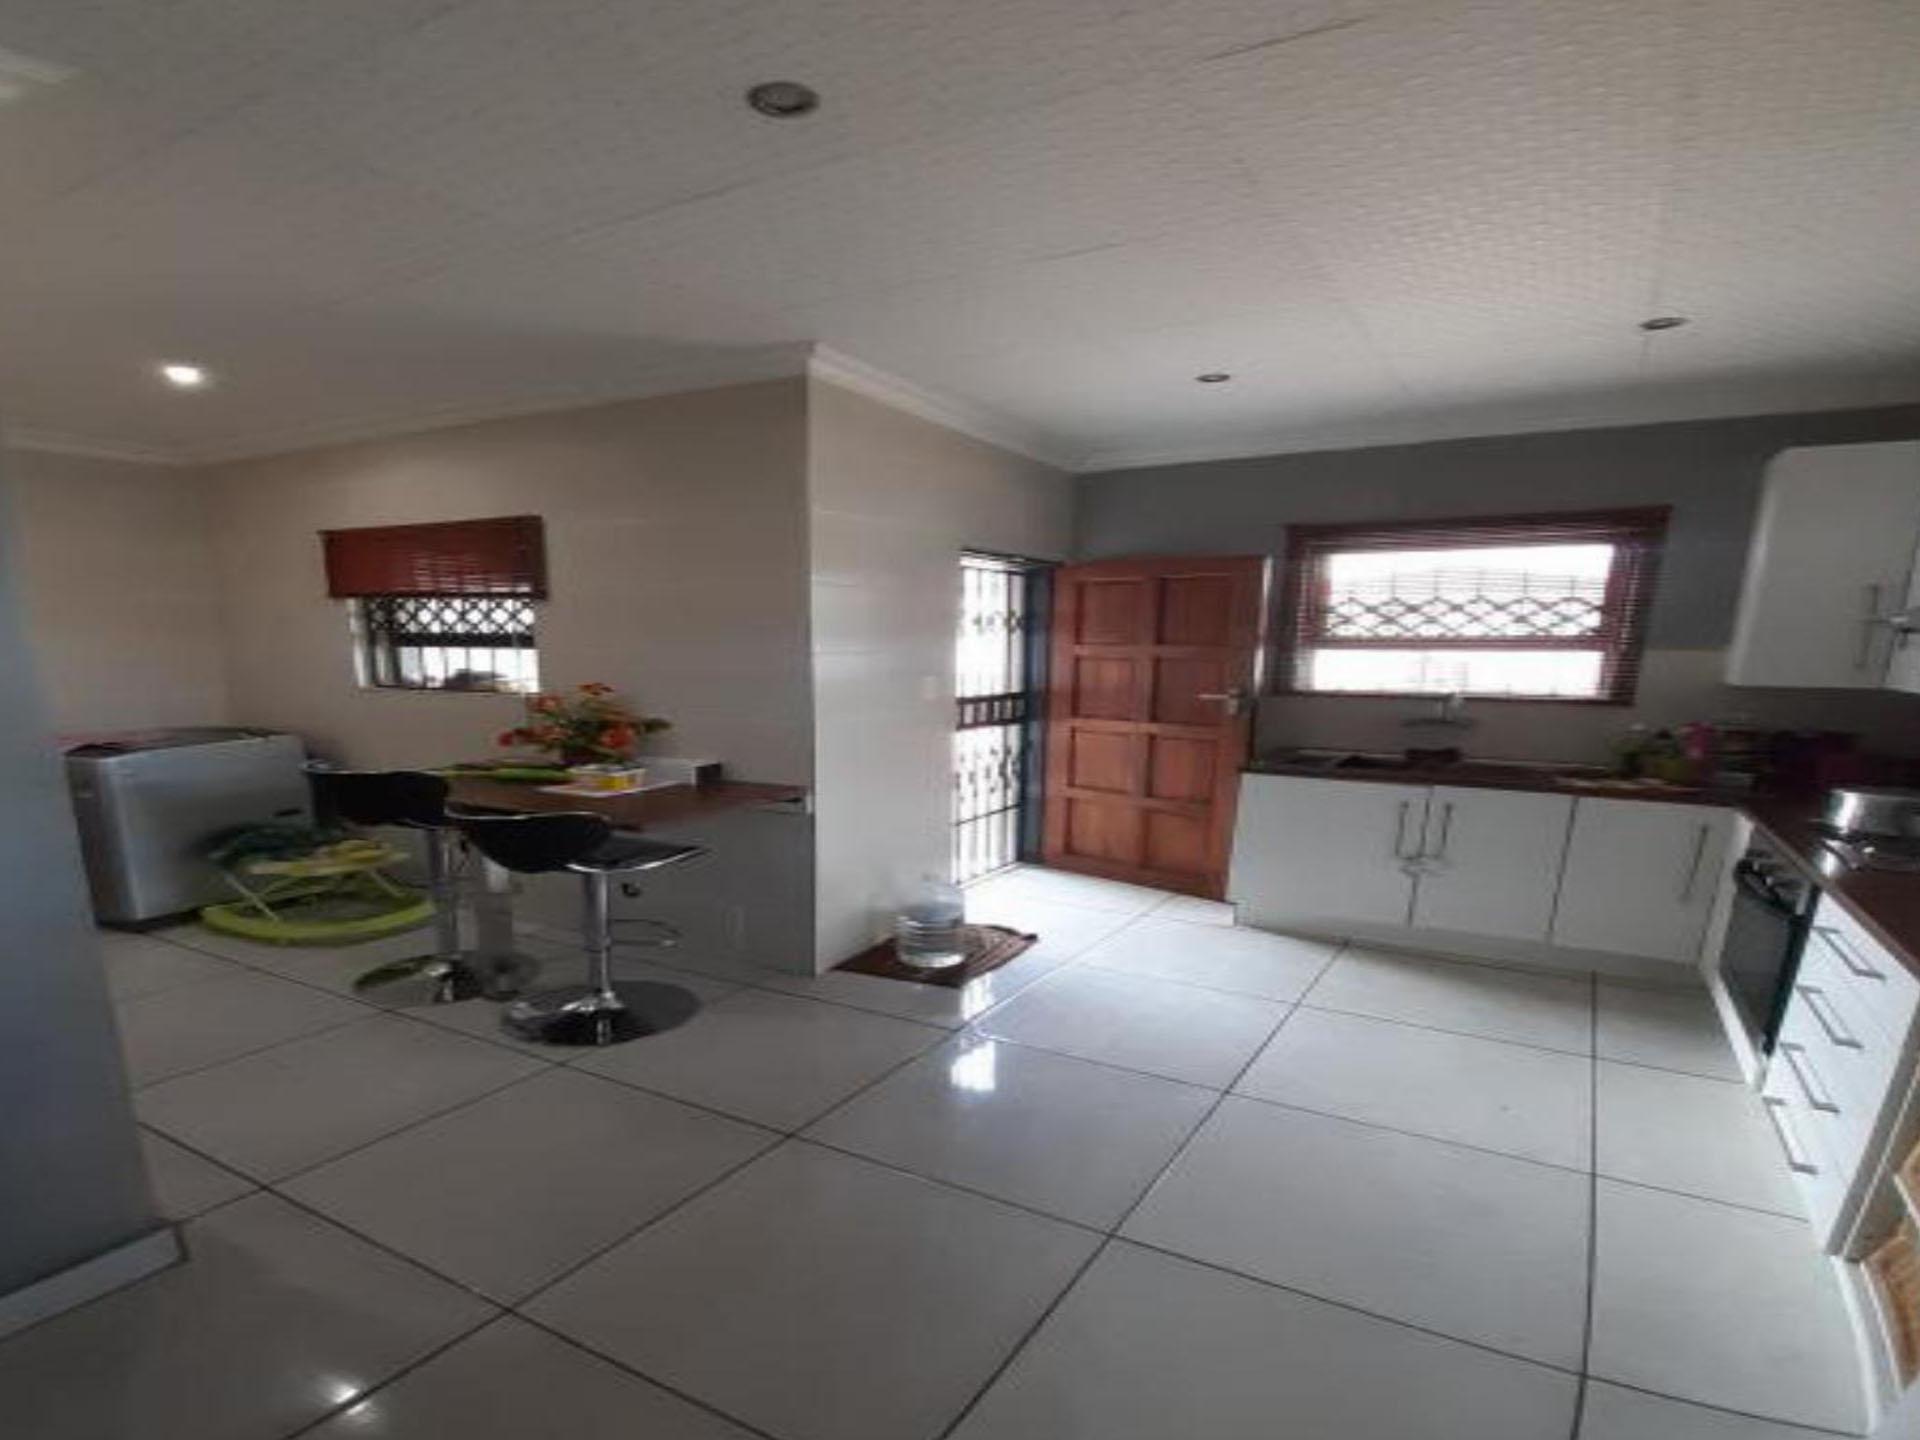 Kitchen - 21 square meters of property in Culturapark